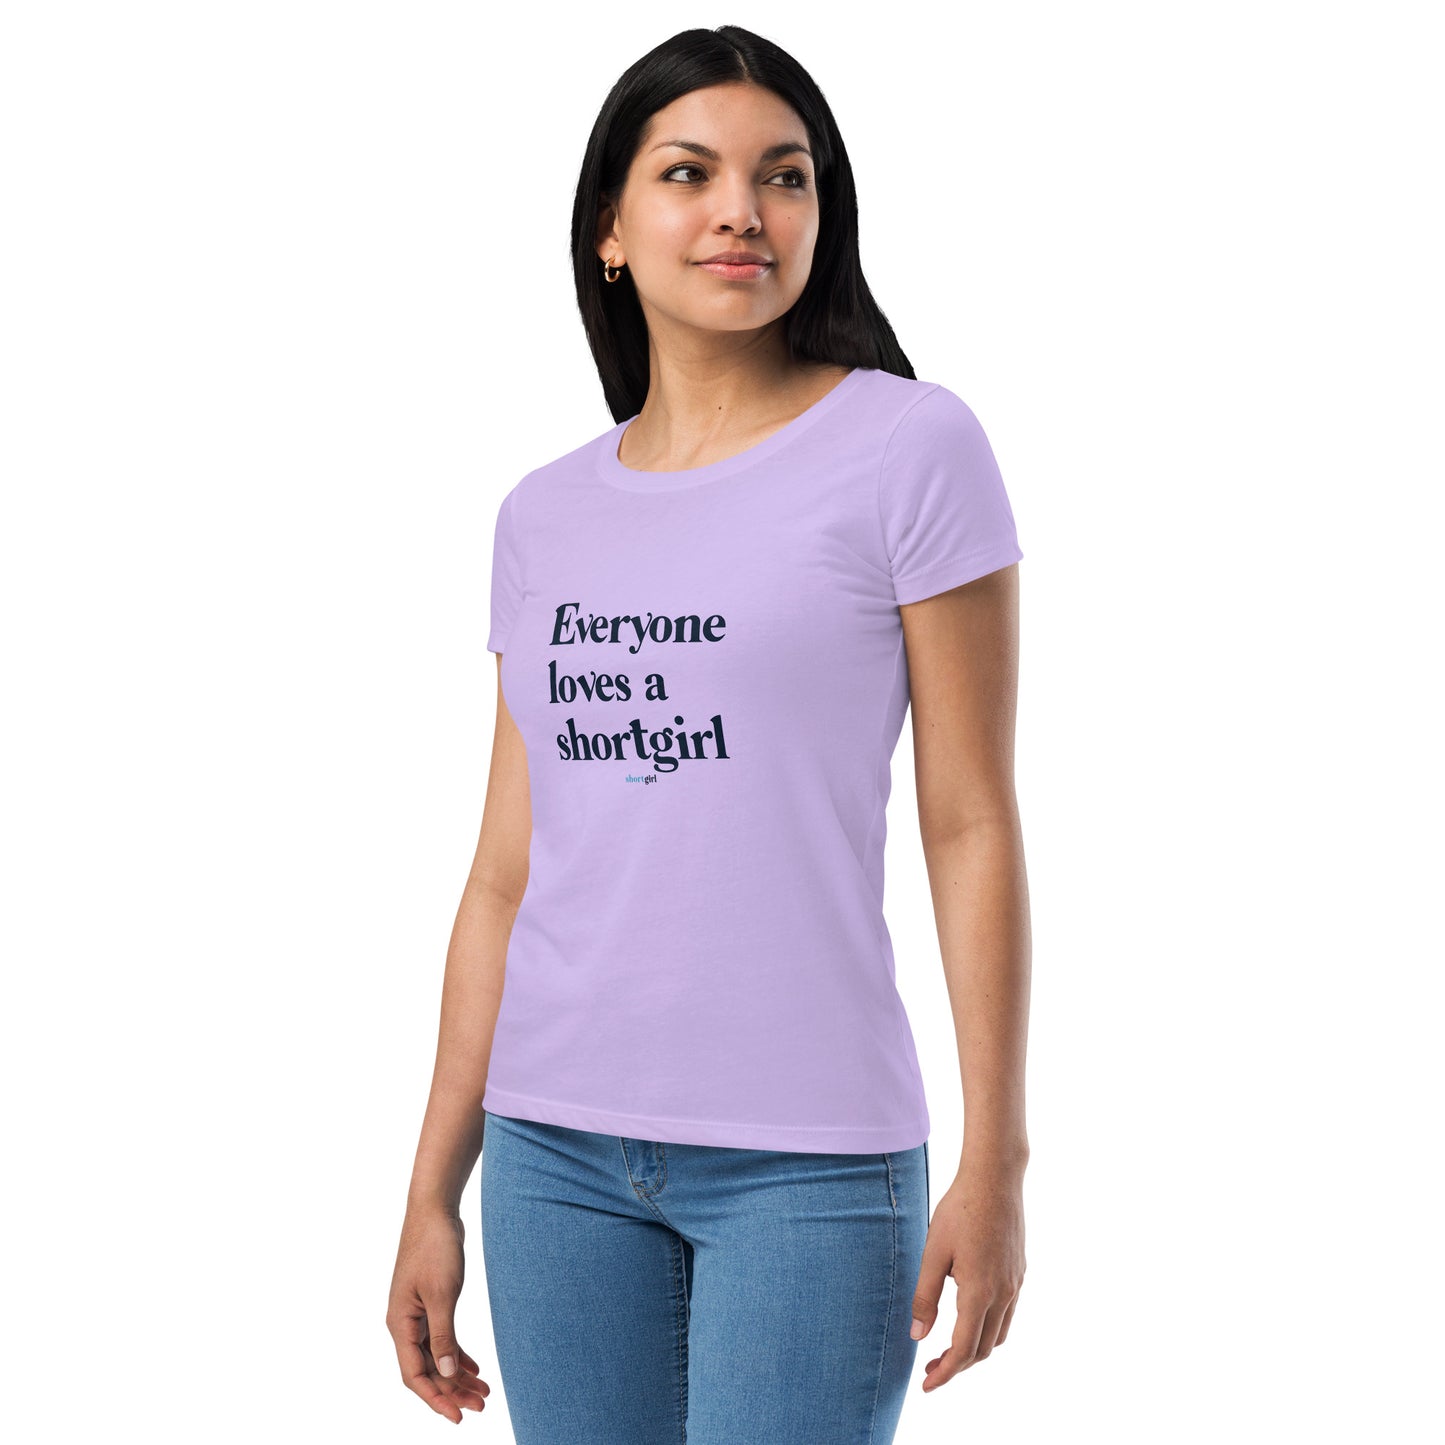 Women’s fitted t-shirt - Everyone Loves a shortgirl